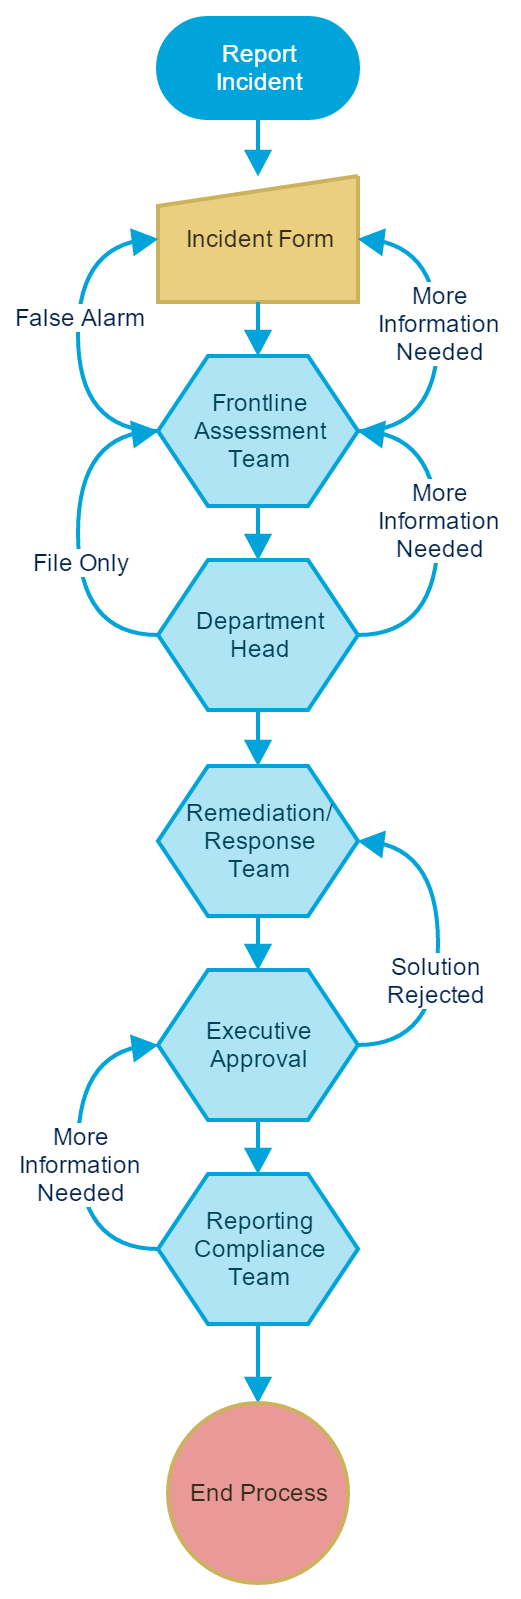 A network diagram shows the steps for incident response.